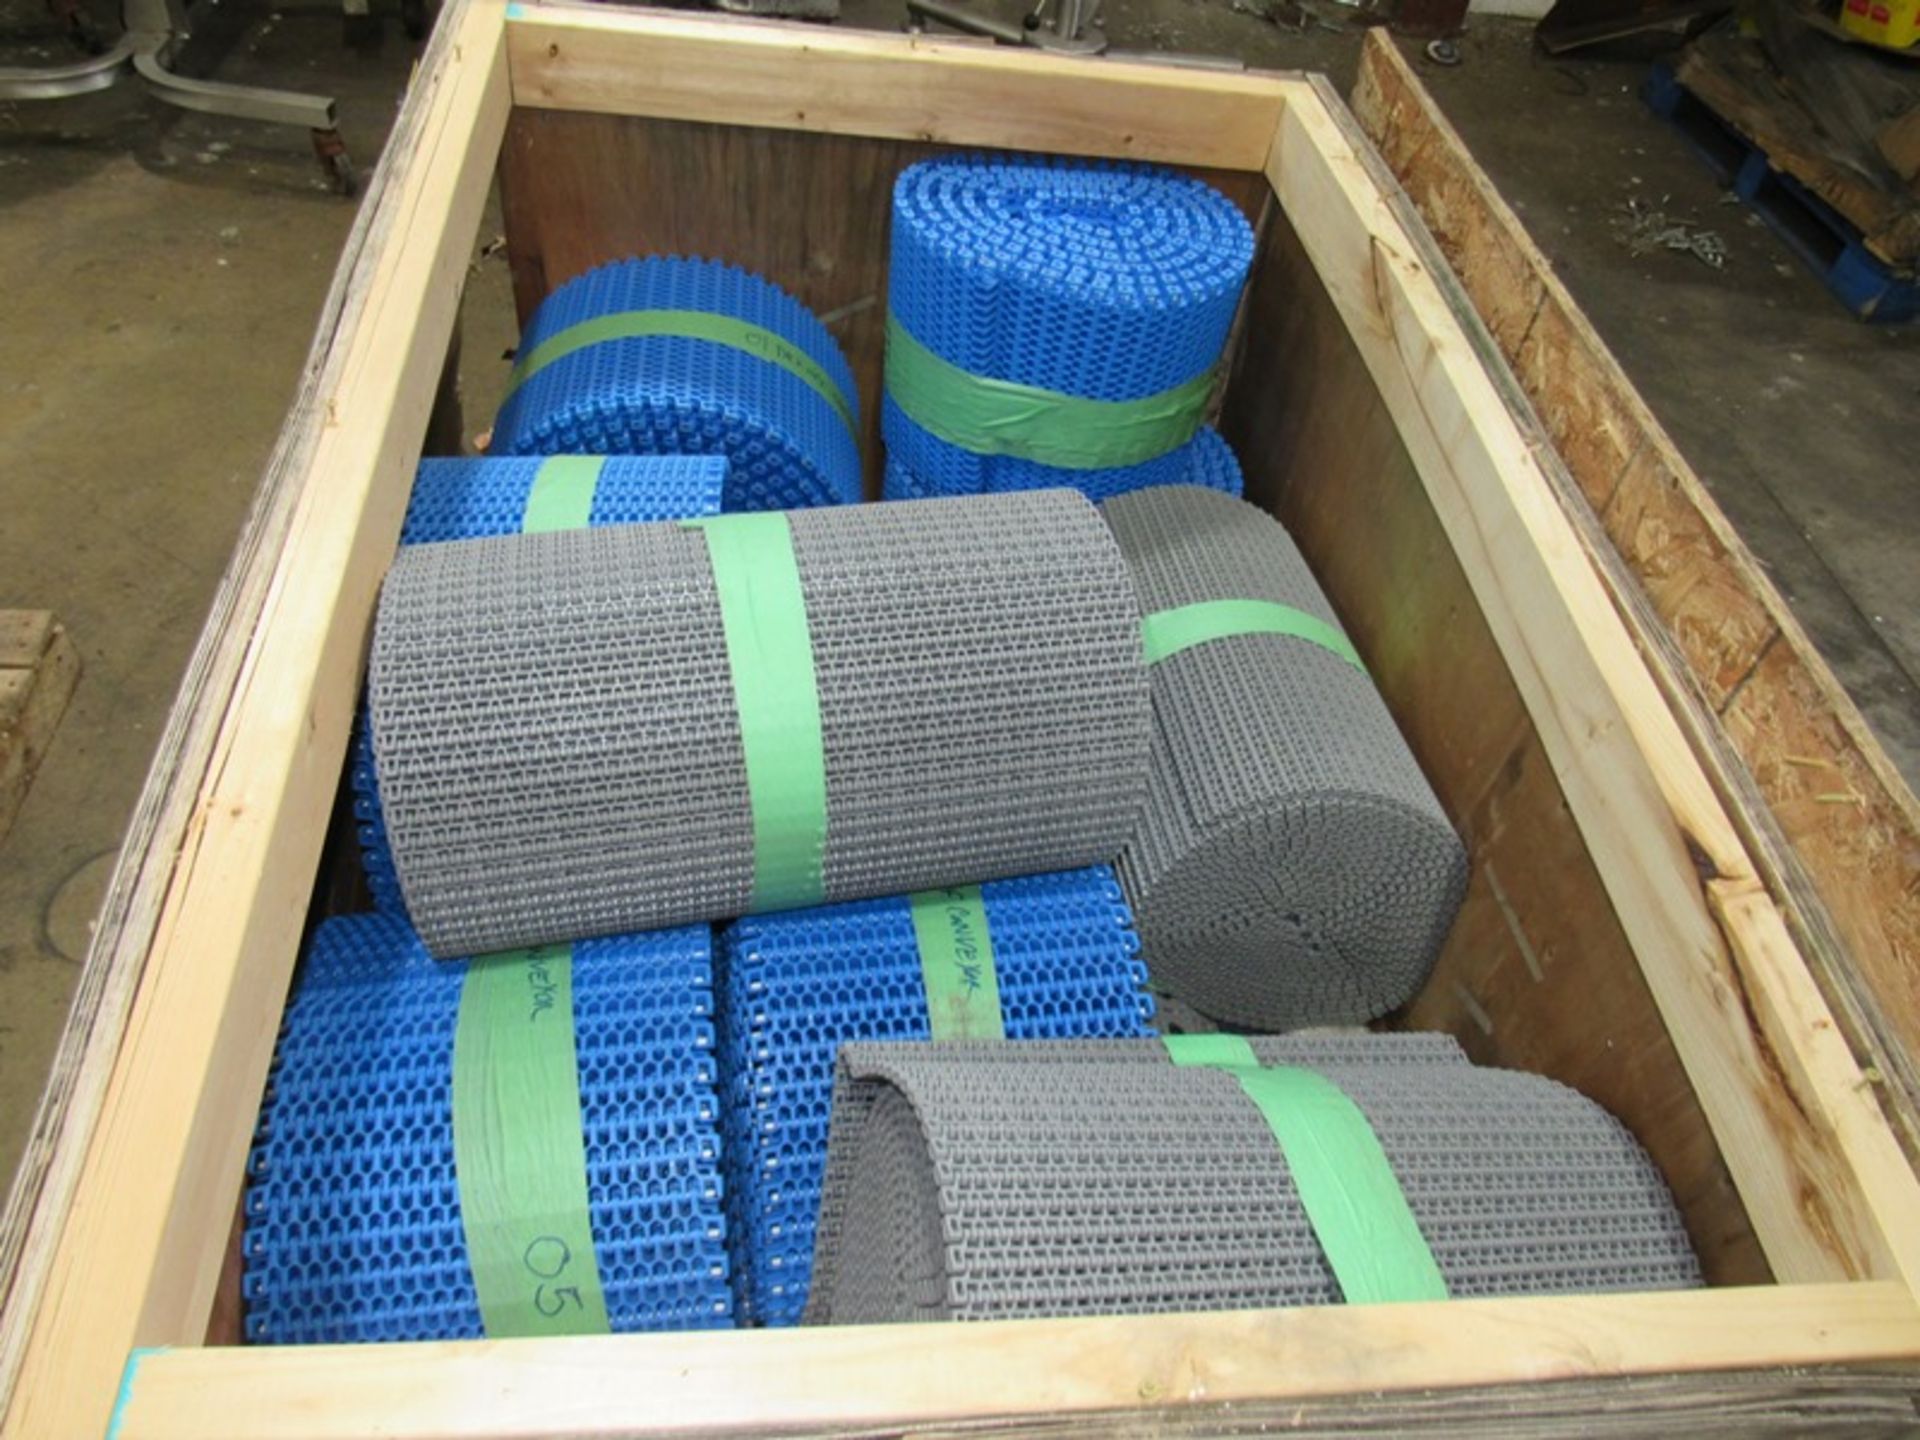 Lot of (10) Rolls, (3) Gray Rolls, 20" wide, (7) Blue Rolls, 12" wide, Located in Plano, Illinois (